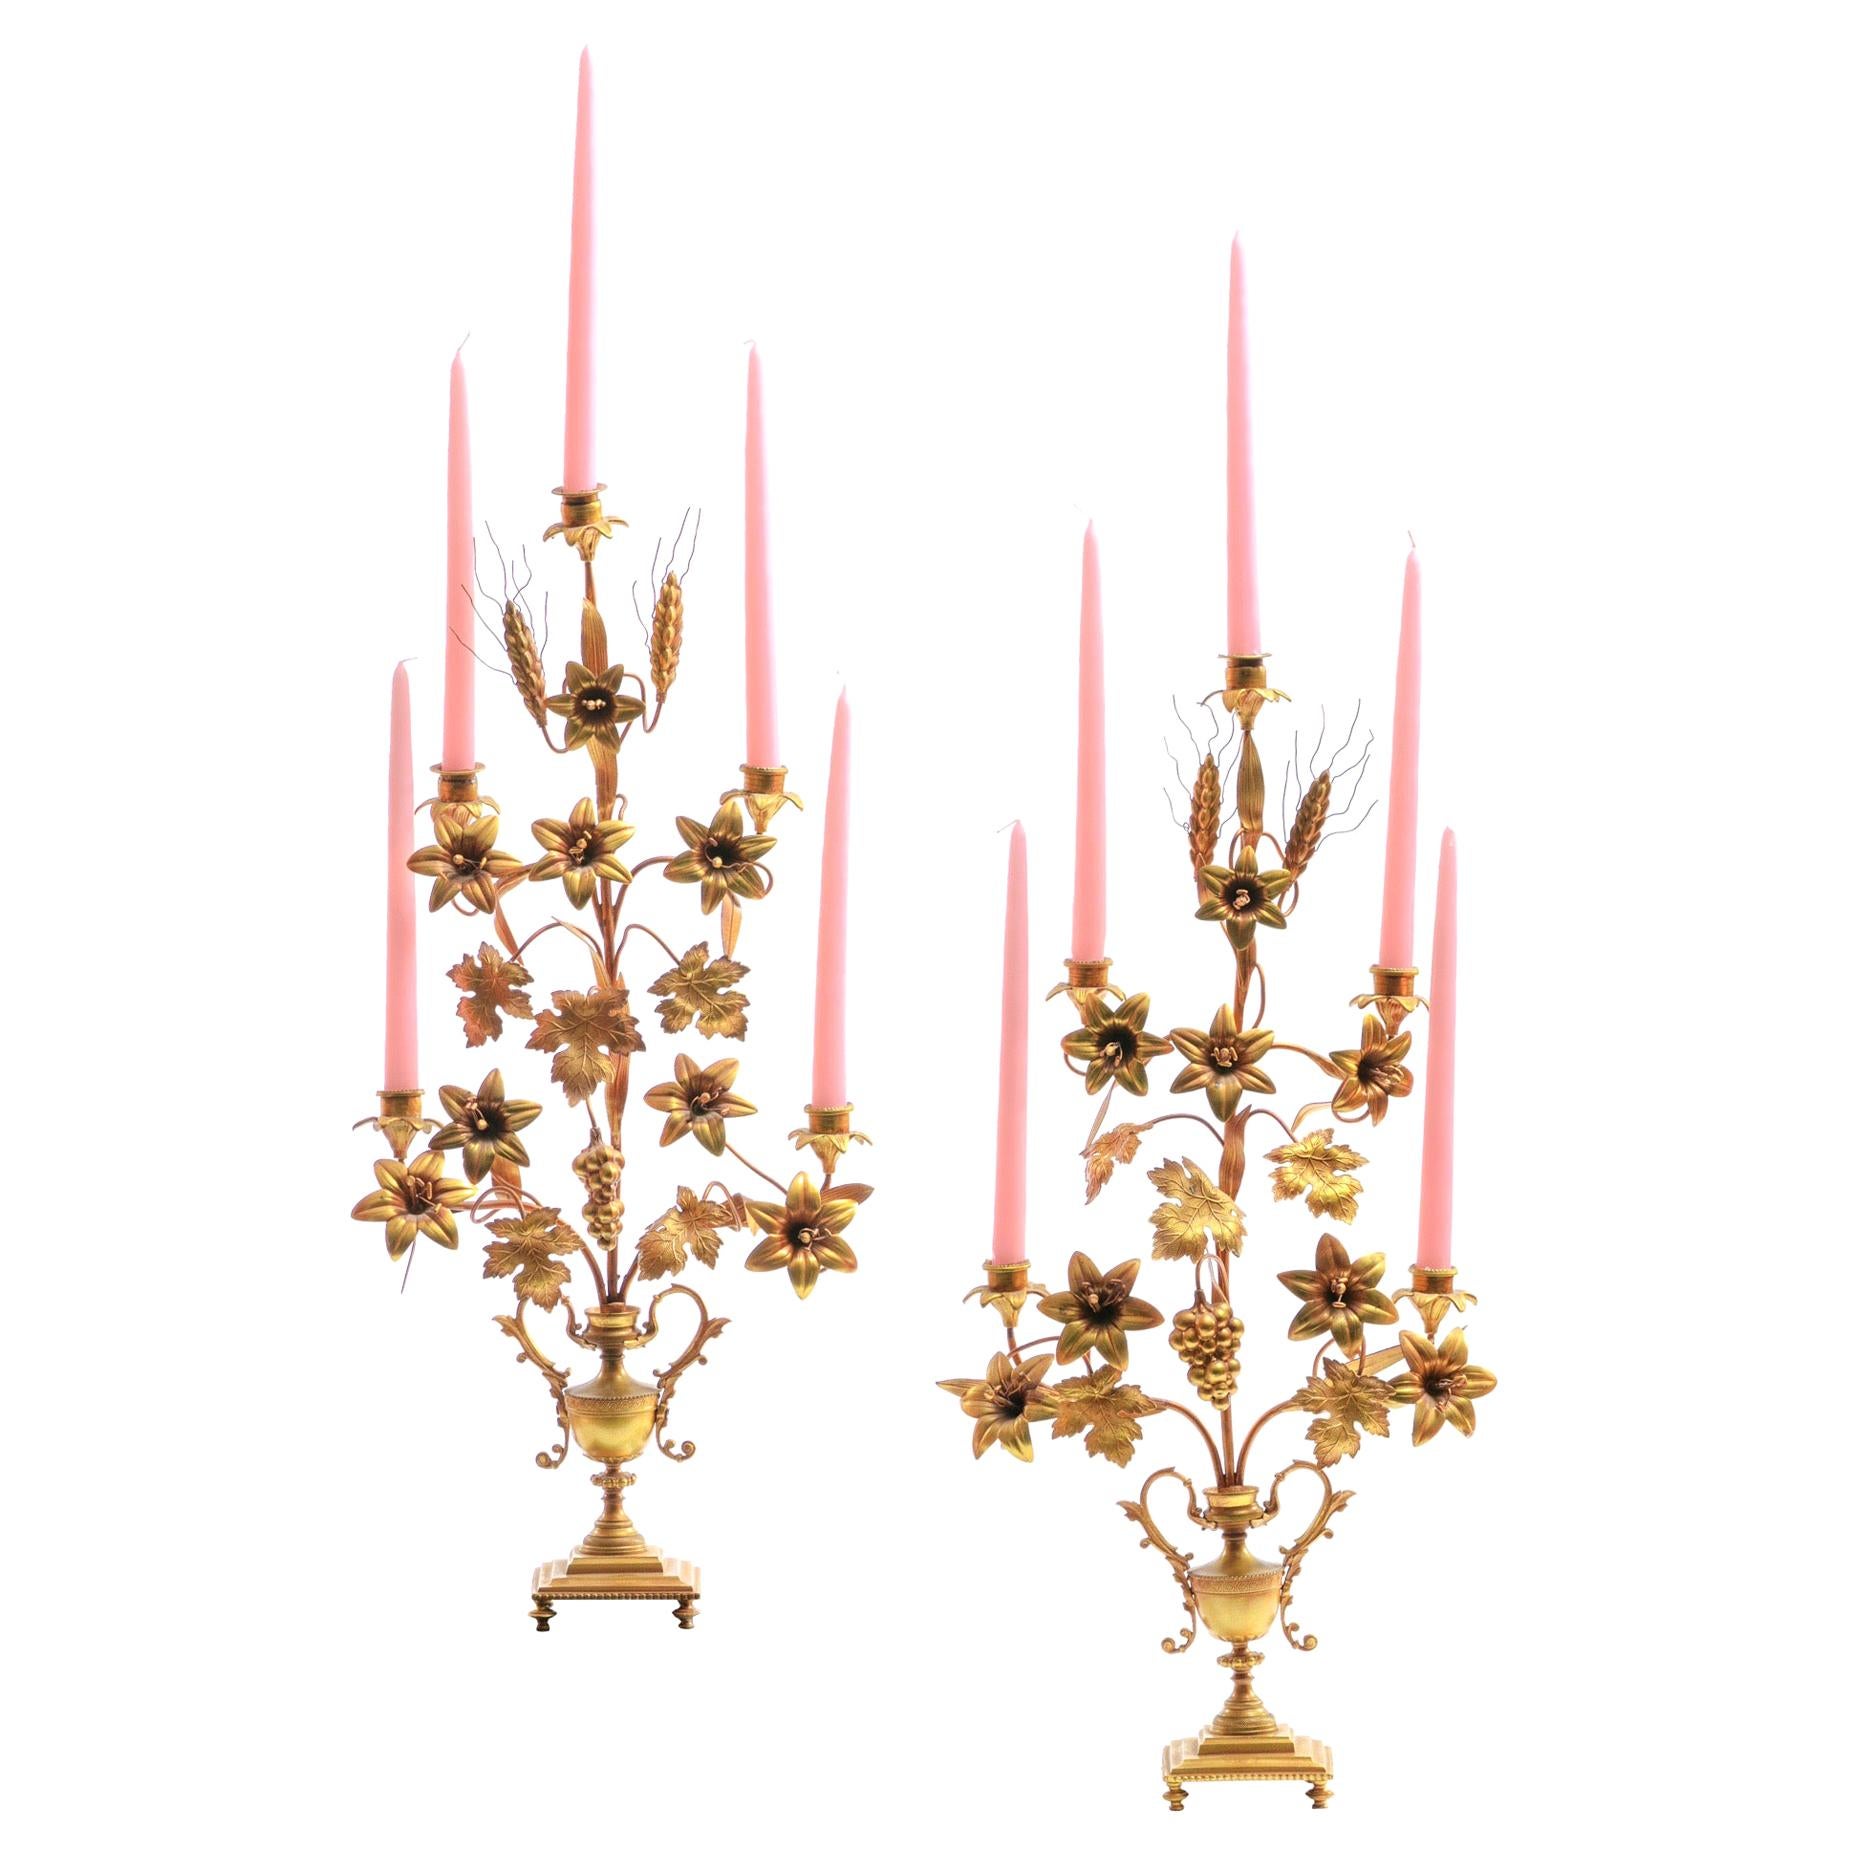 1960s Pair of Gilt Tole Italian Candelabra in the Hollywood Regency Style